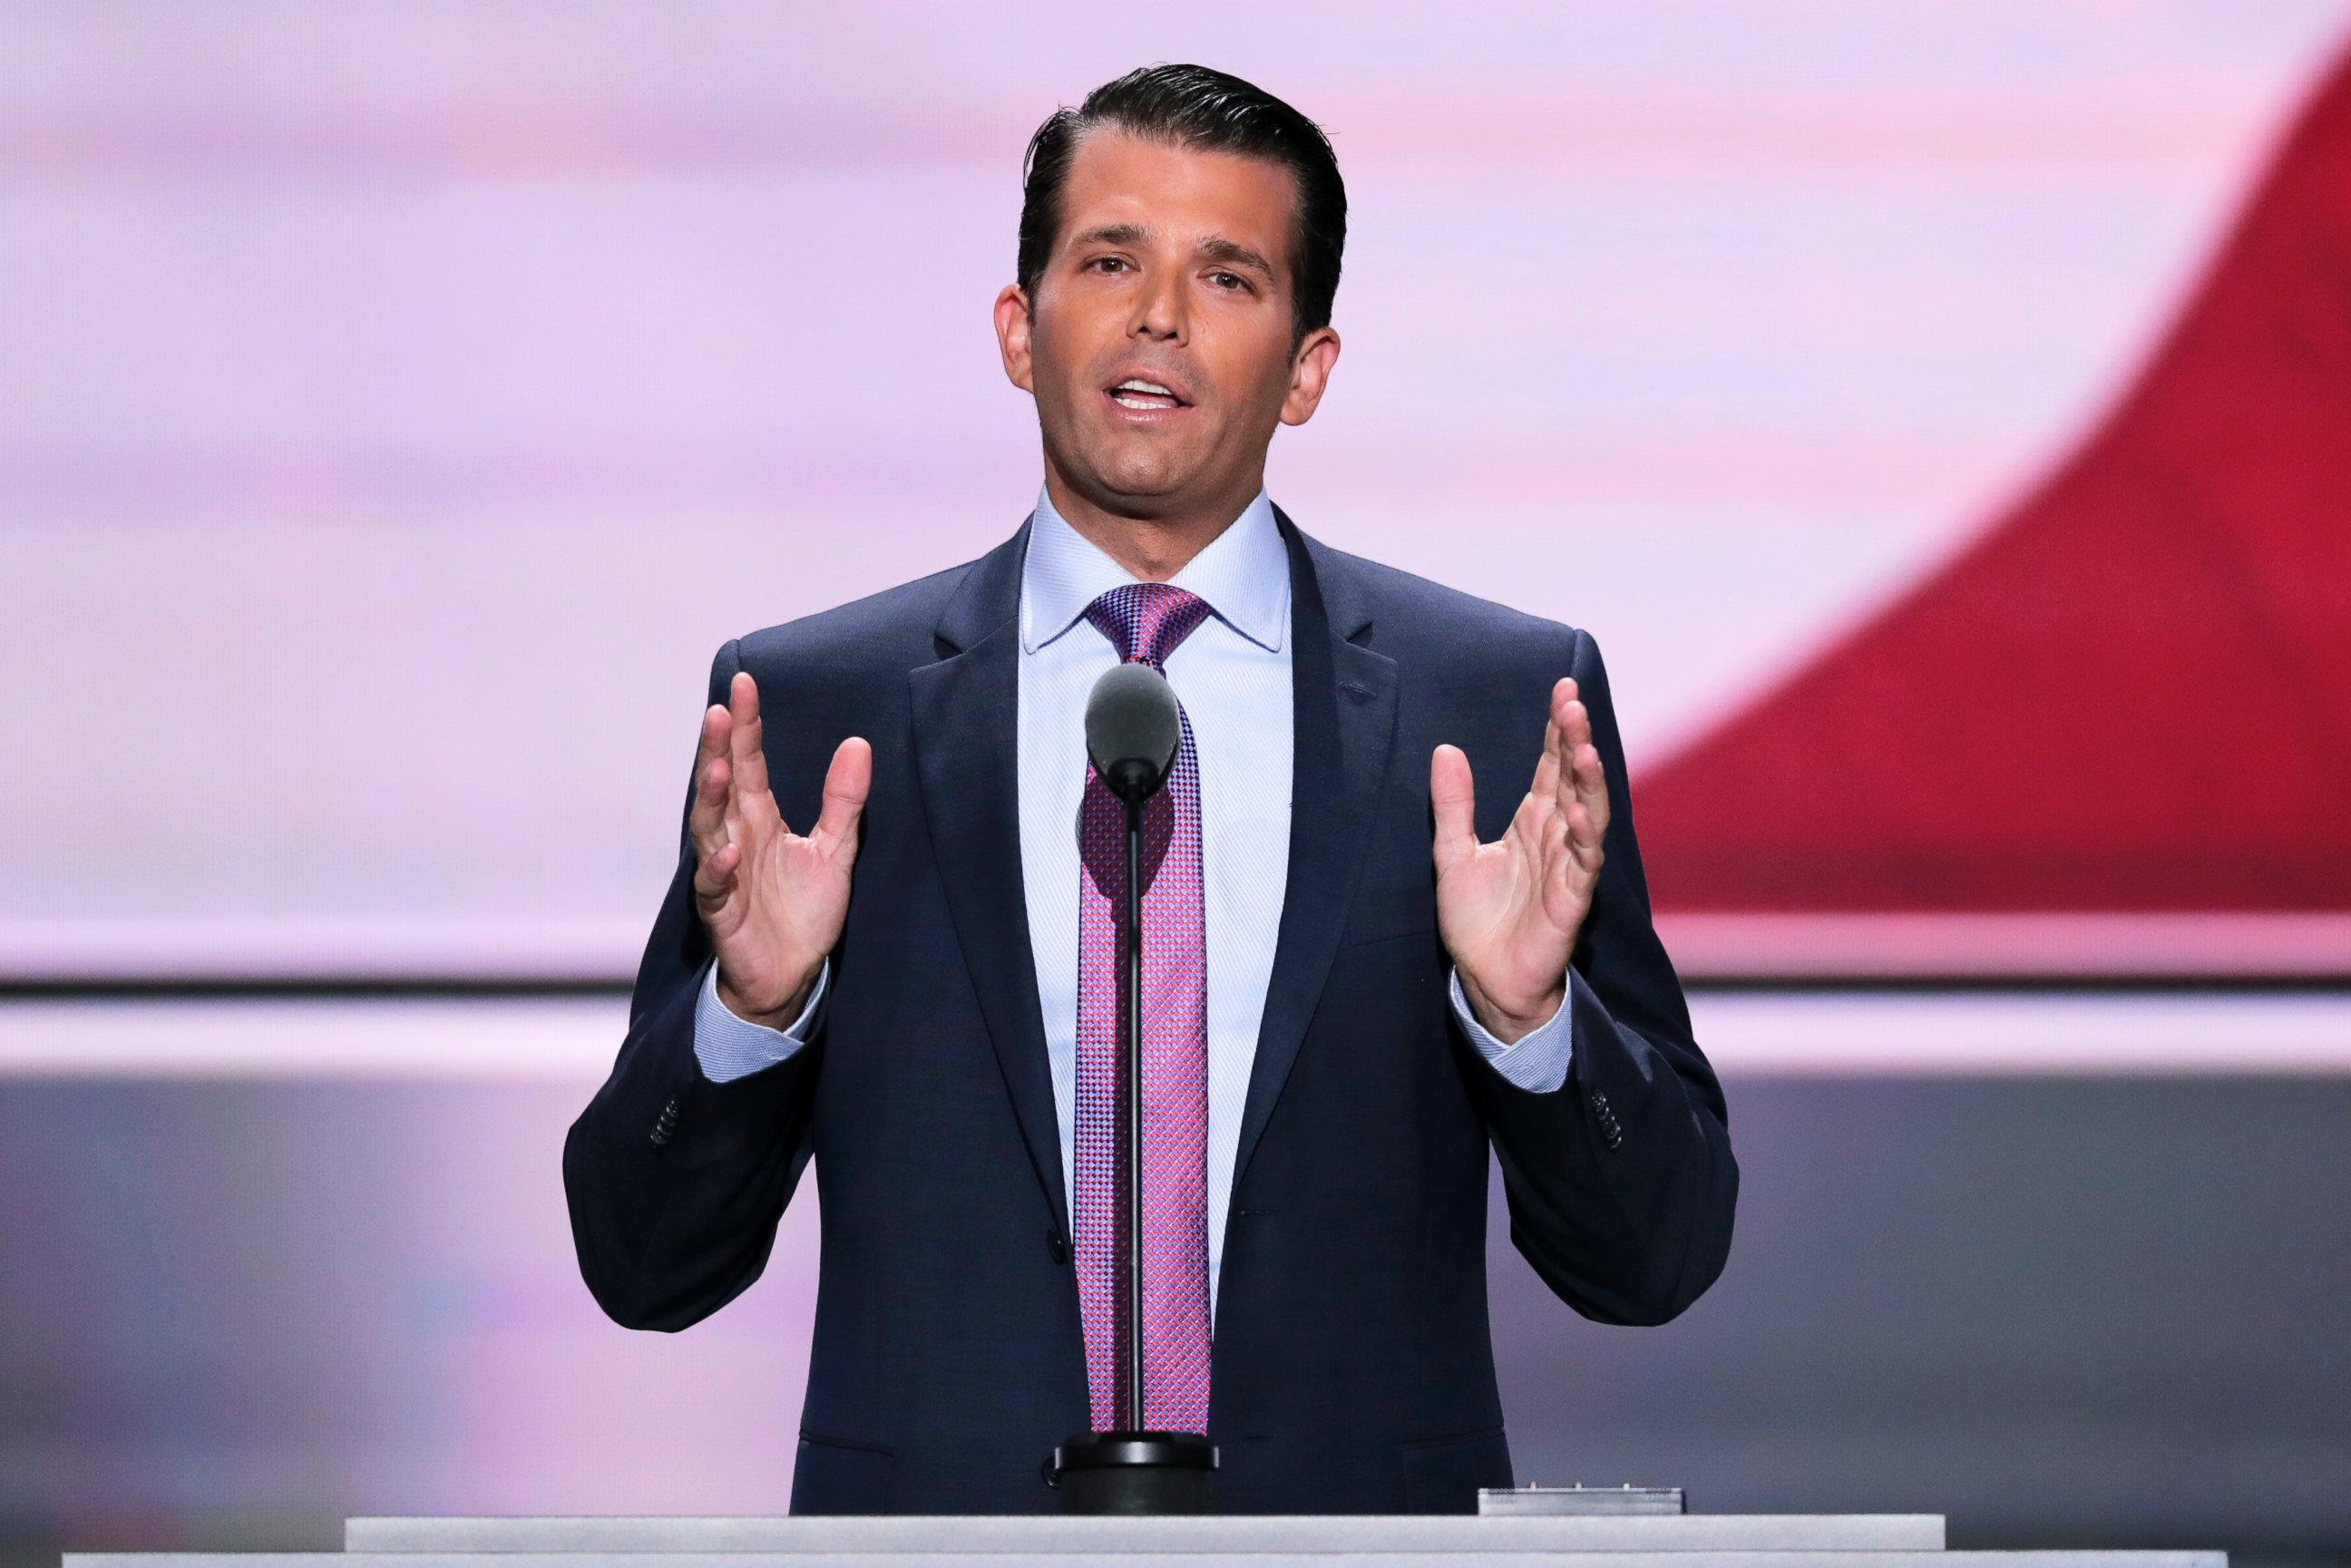 PHOTO:Donald Trump, Jr., son of presumptive Republican presidential nominee  Donald Trump, speaks during the second day of the Republican National Convention in Cleveland, July 19, 2016.  